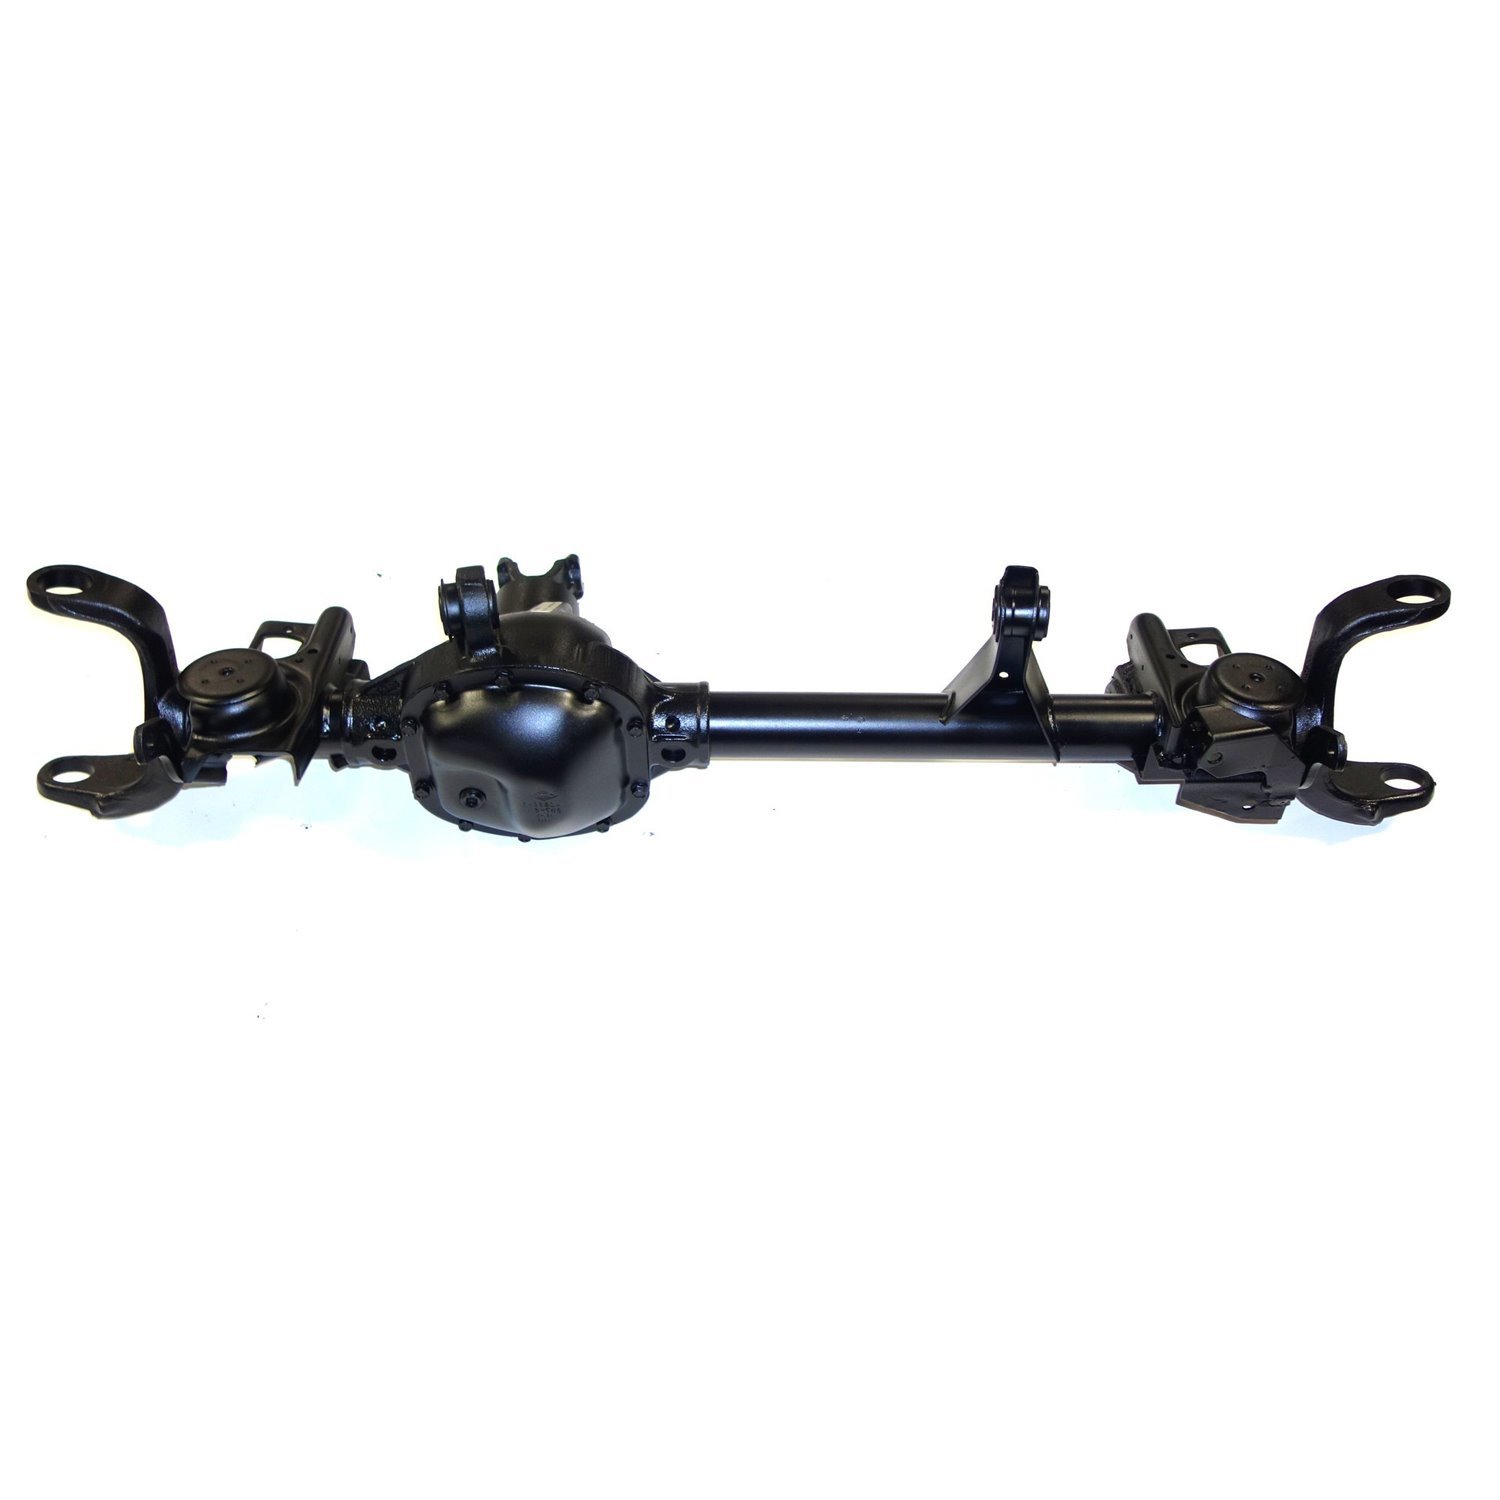 Remanufactured Complete Axle Assembly for Dana 30 2000 Jeep Grand Cherokee 3.91